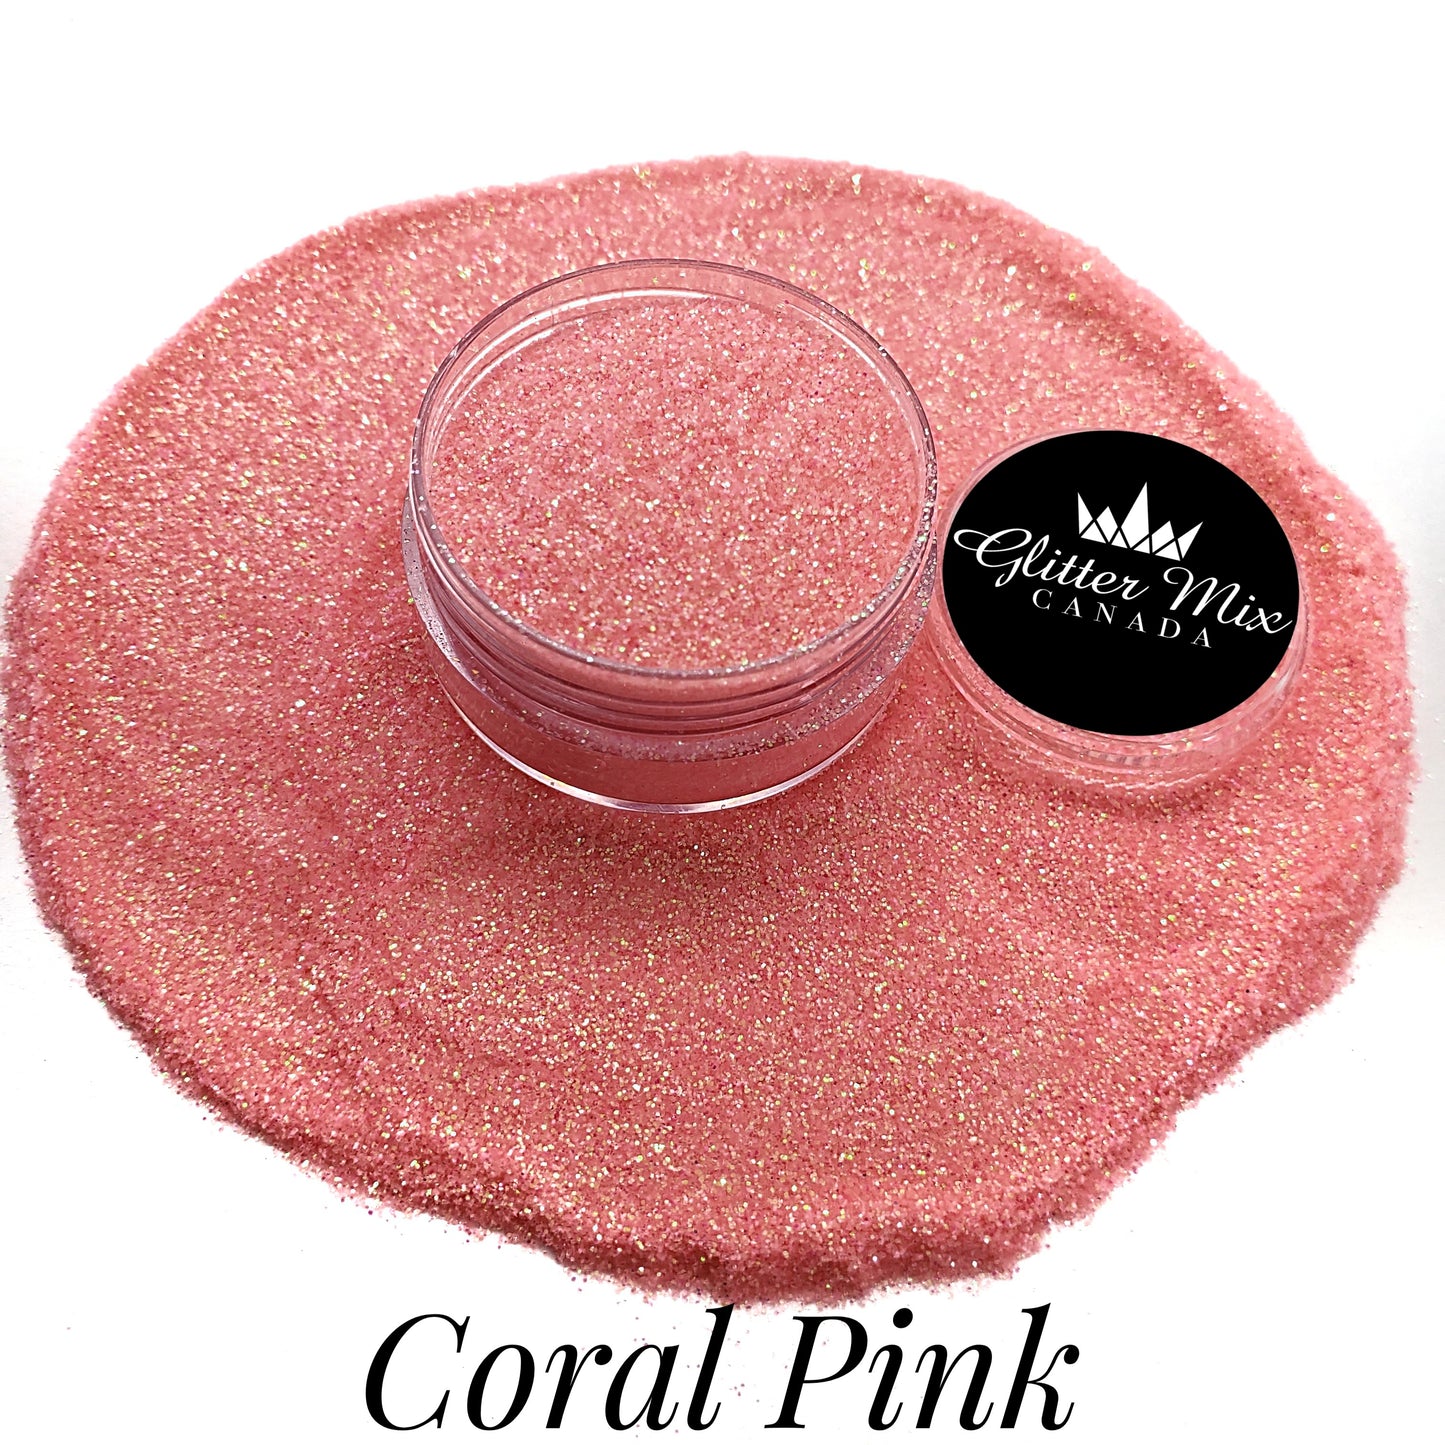 396-Coral Pink 10g